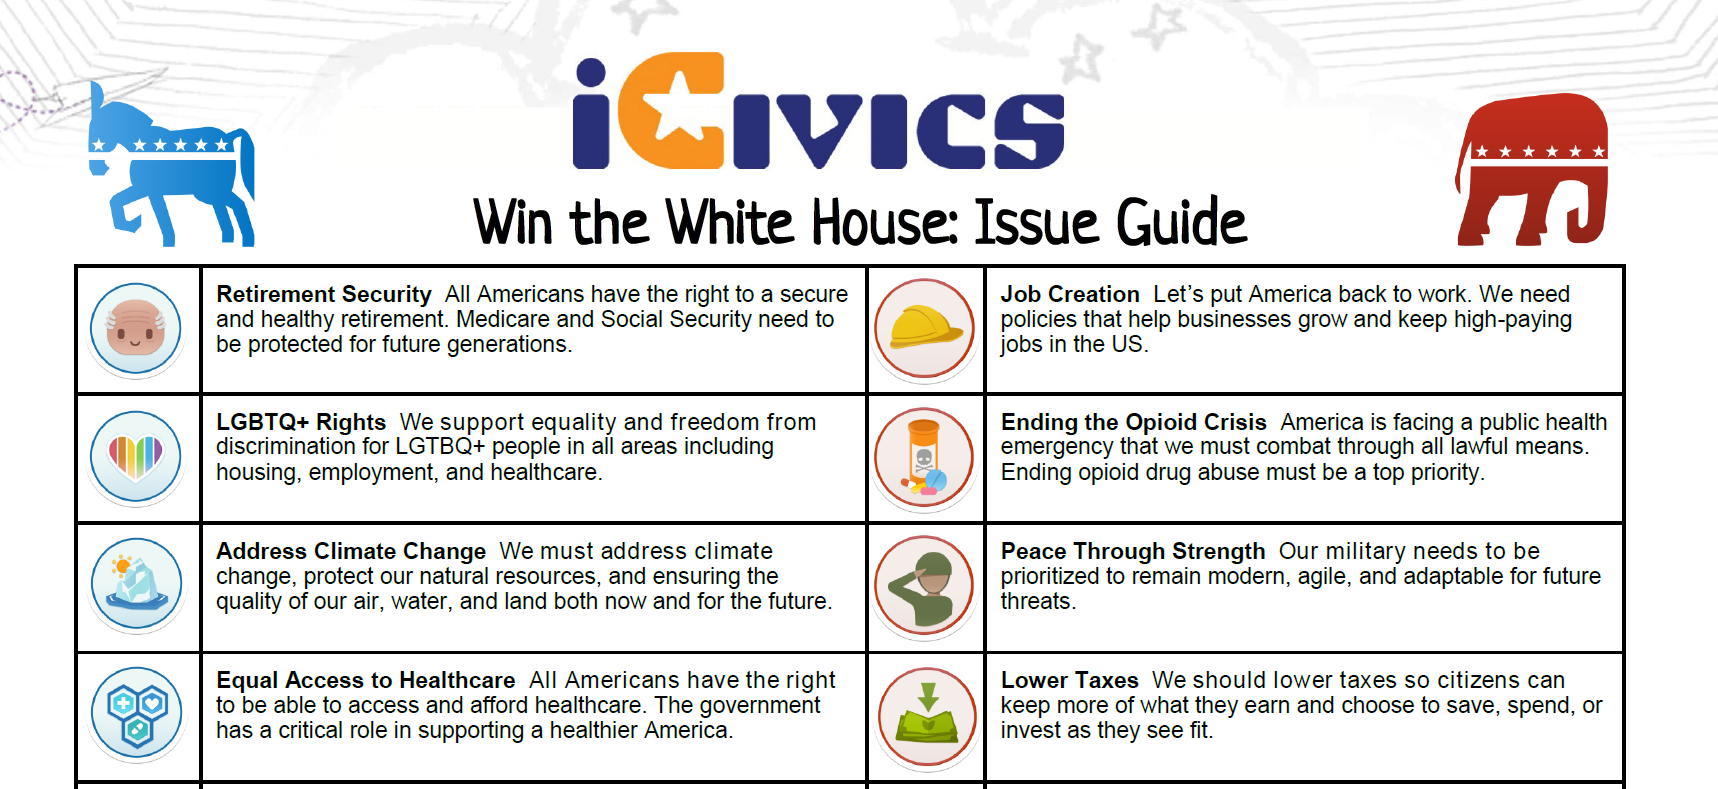 Win the White House 2020 Issue Guide